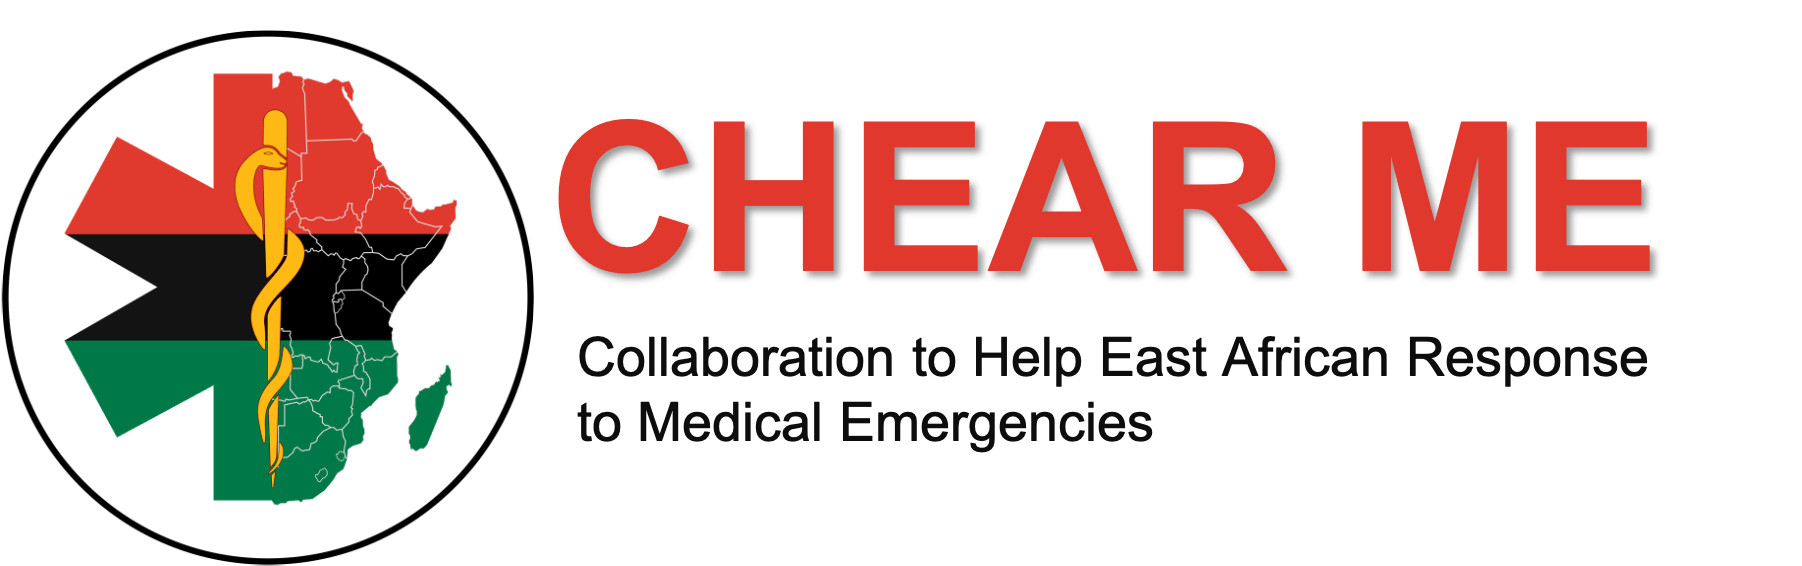 CHEAR ME: Collaboration to Help East African Response to Medical Emergencies